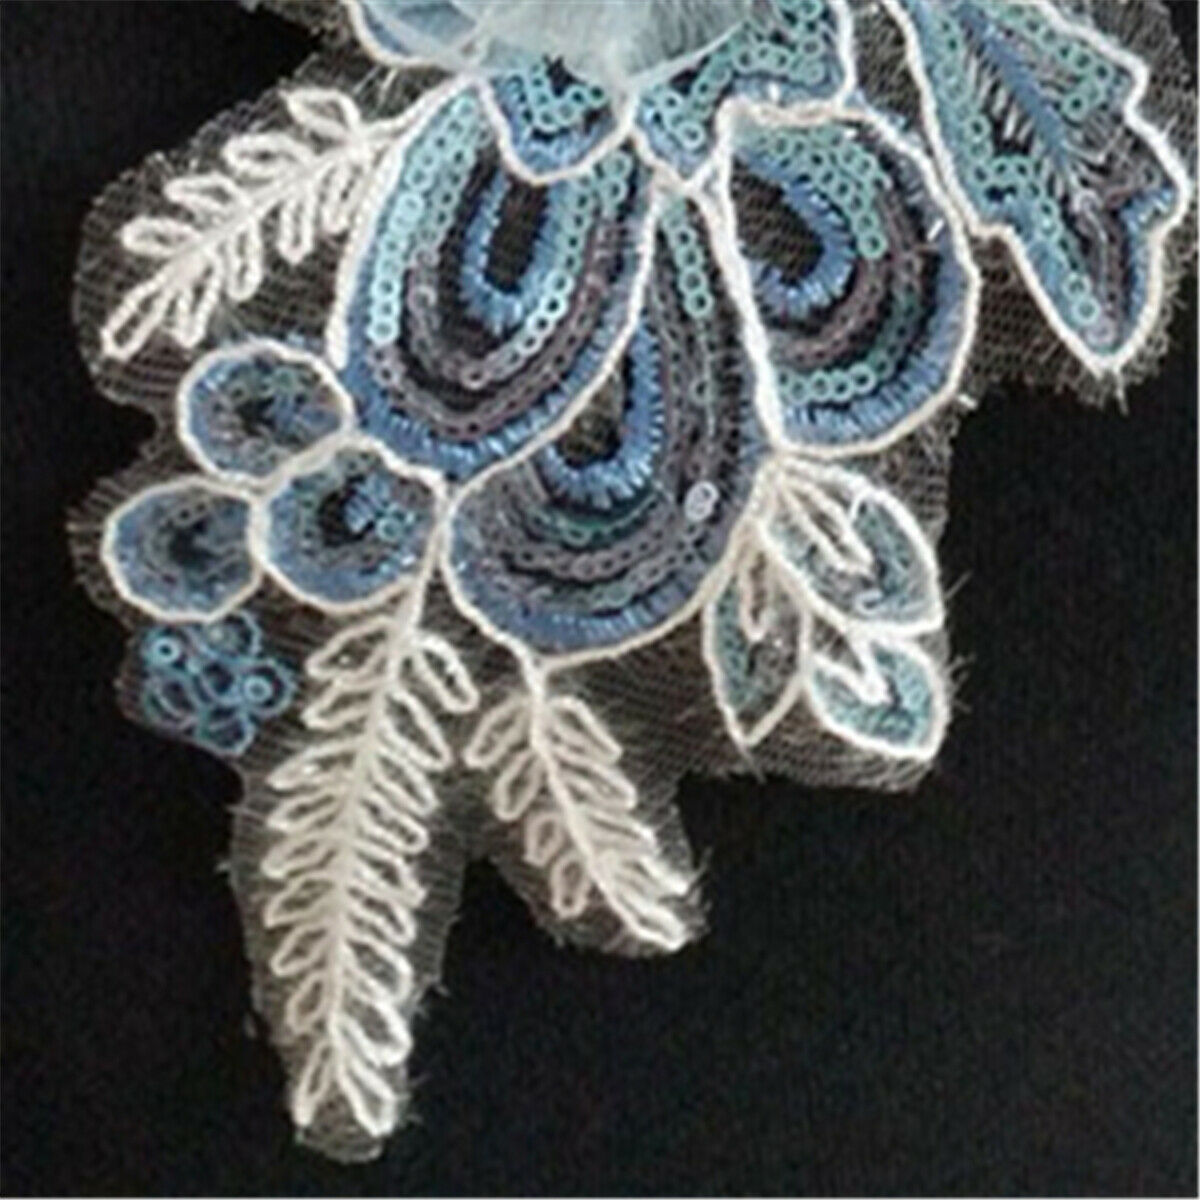 Flower Applique Bead Sequins Lace Collar Trim Embroidered Neckline Sewing Art